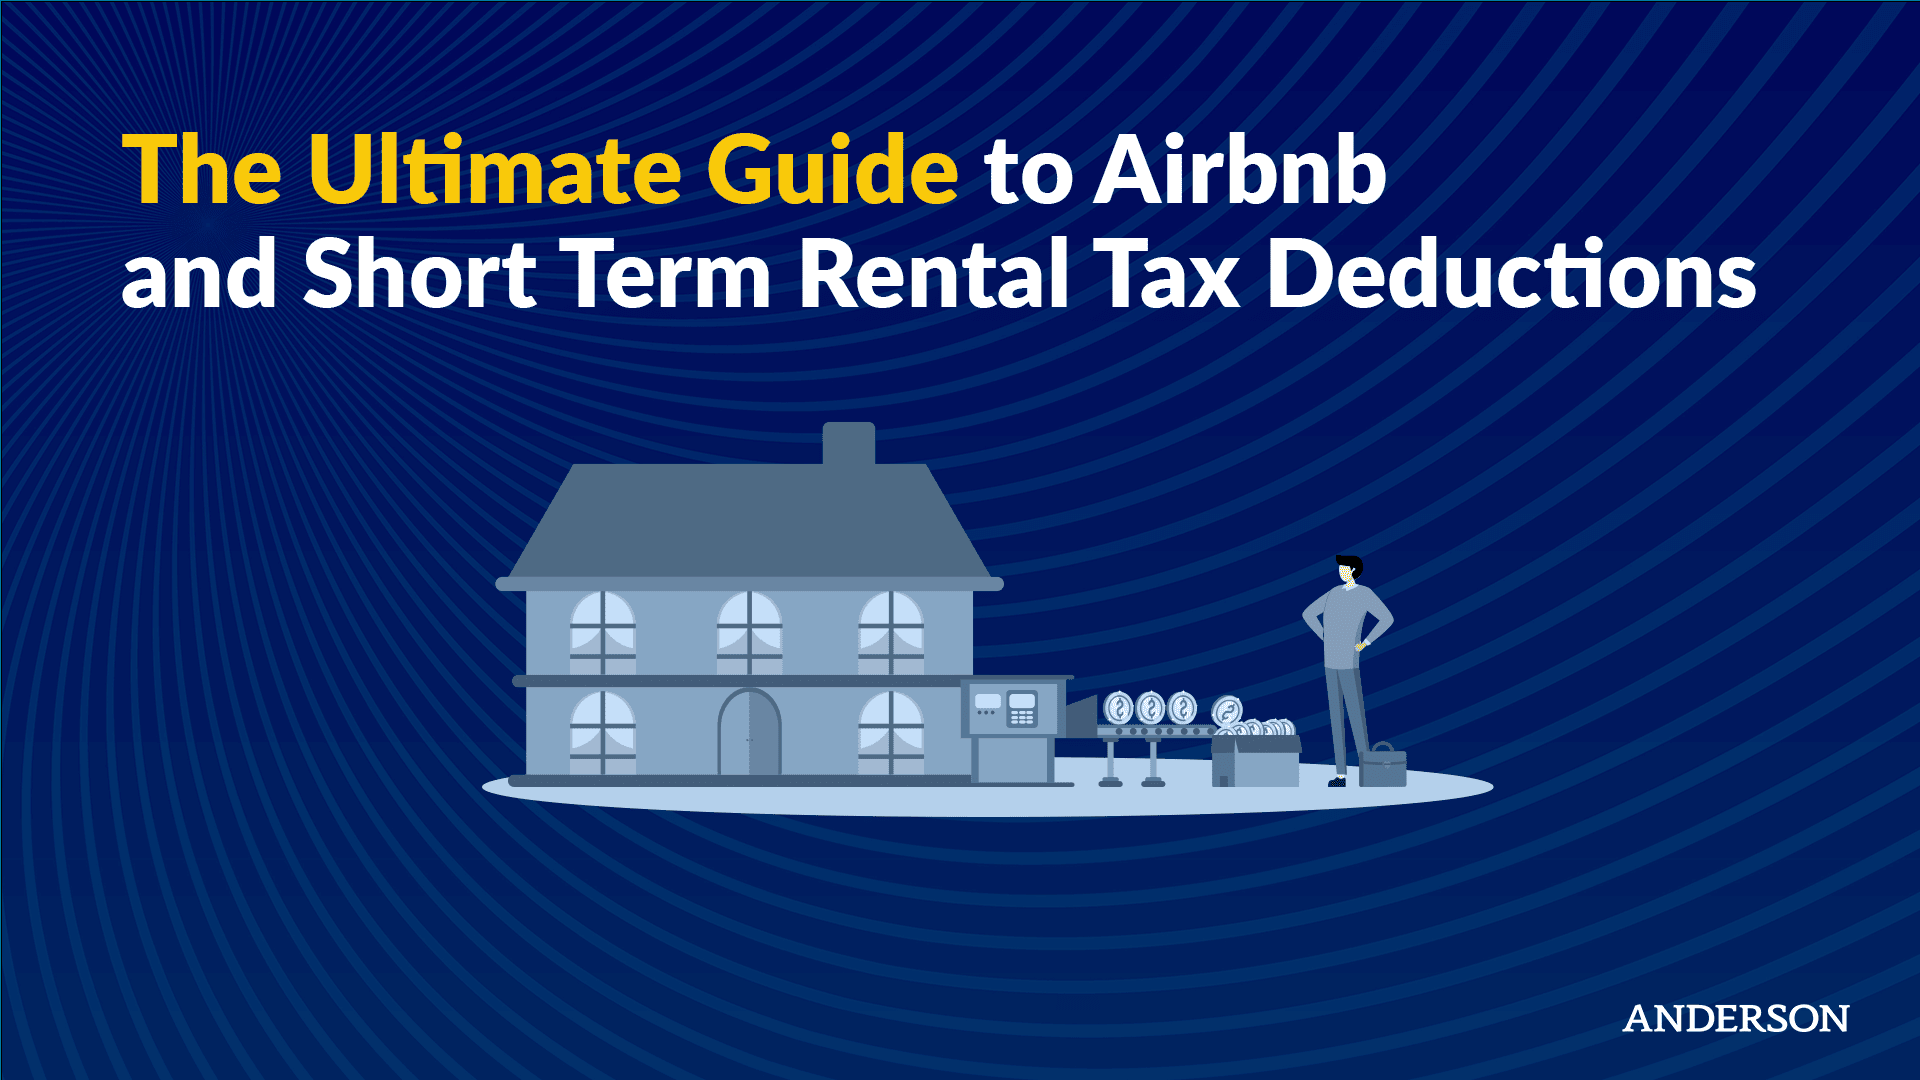 How To Finance An Airbnb Rental Investment